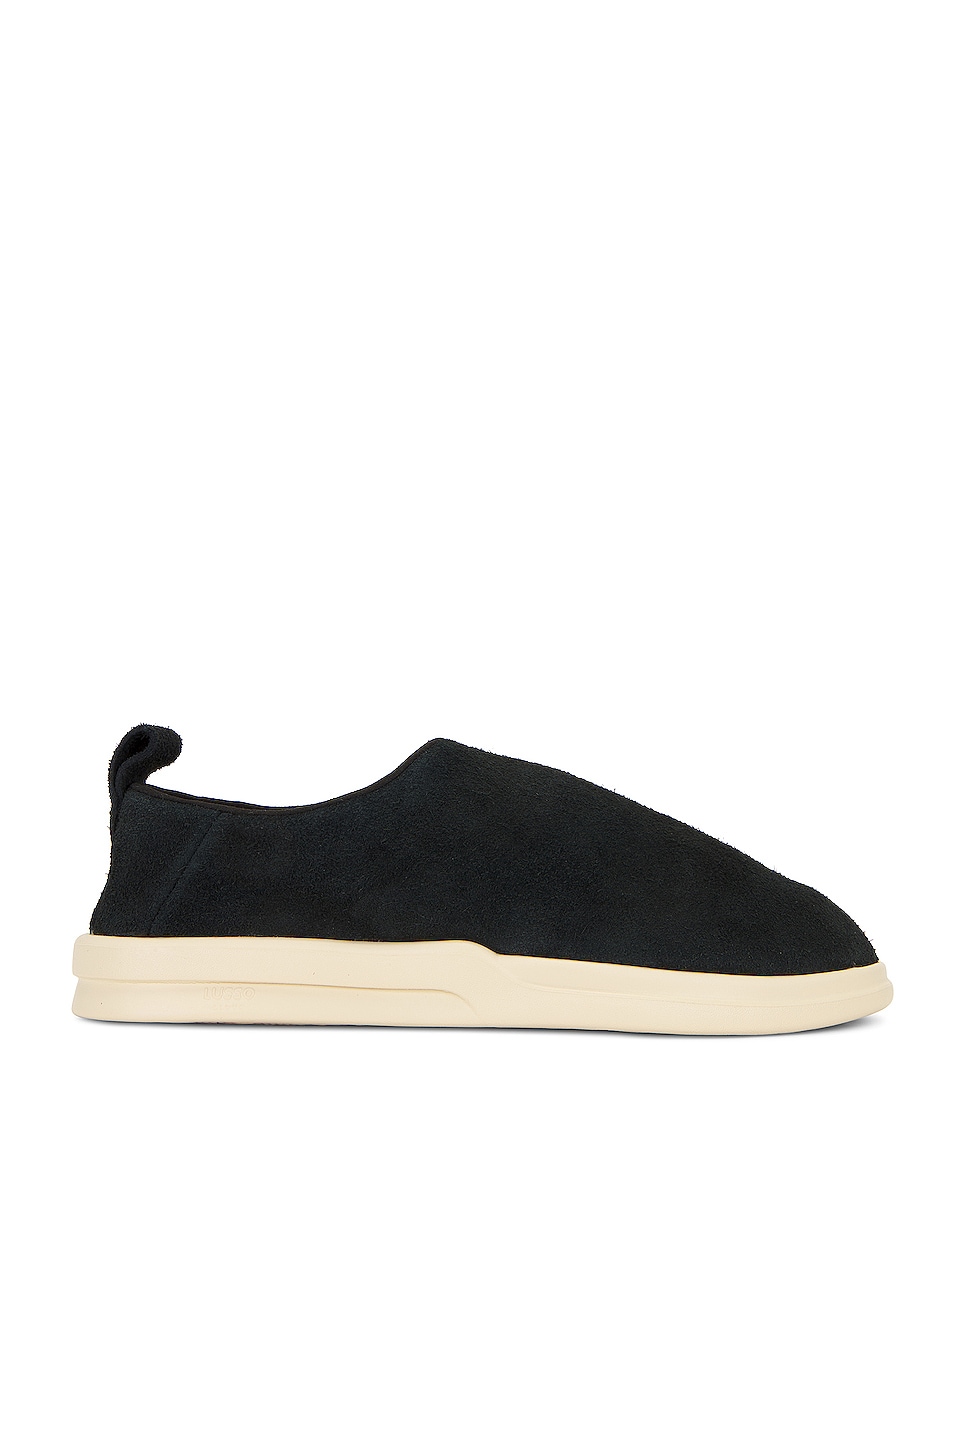 Image 1 of Lusso Cloud Gehry Hairy Suede in Jet Black & Shortbread